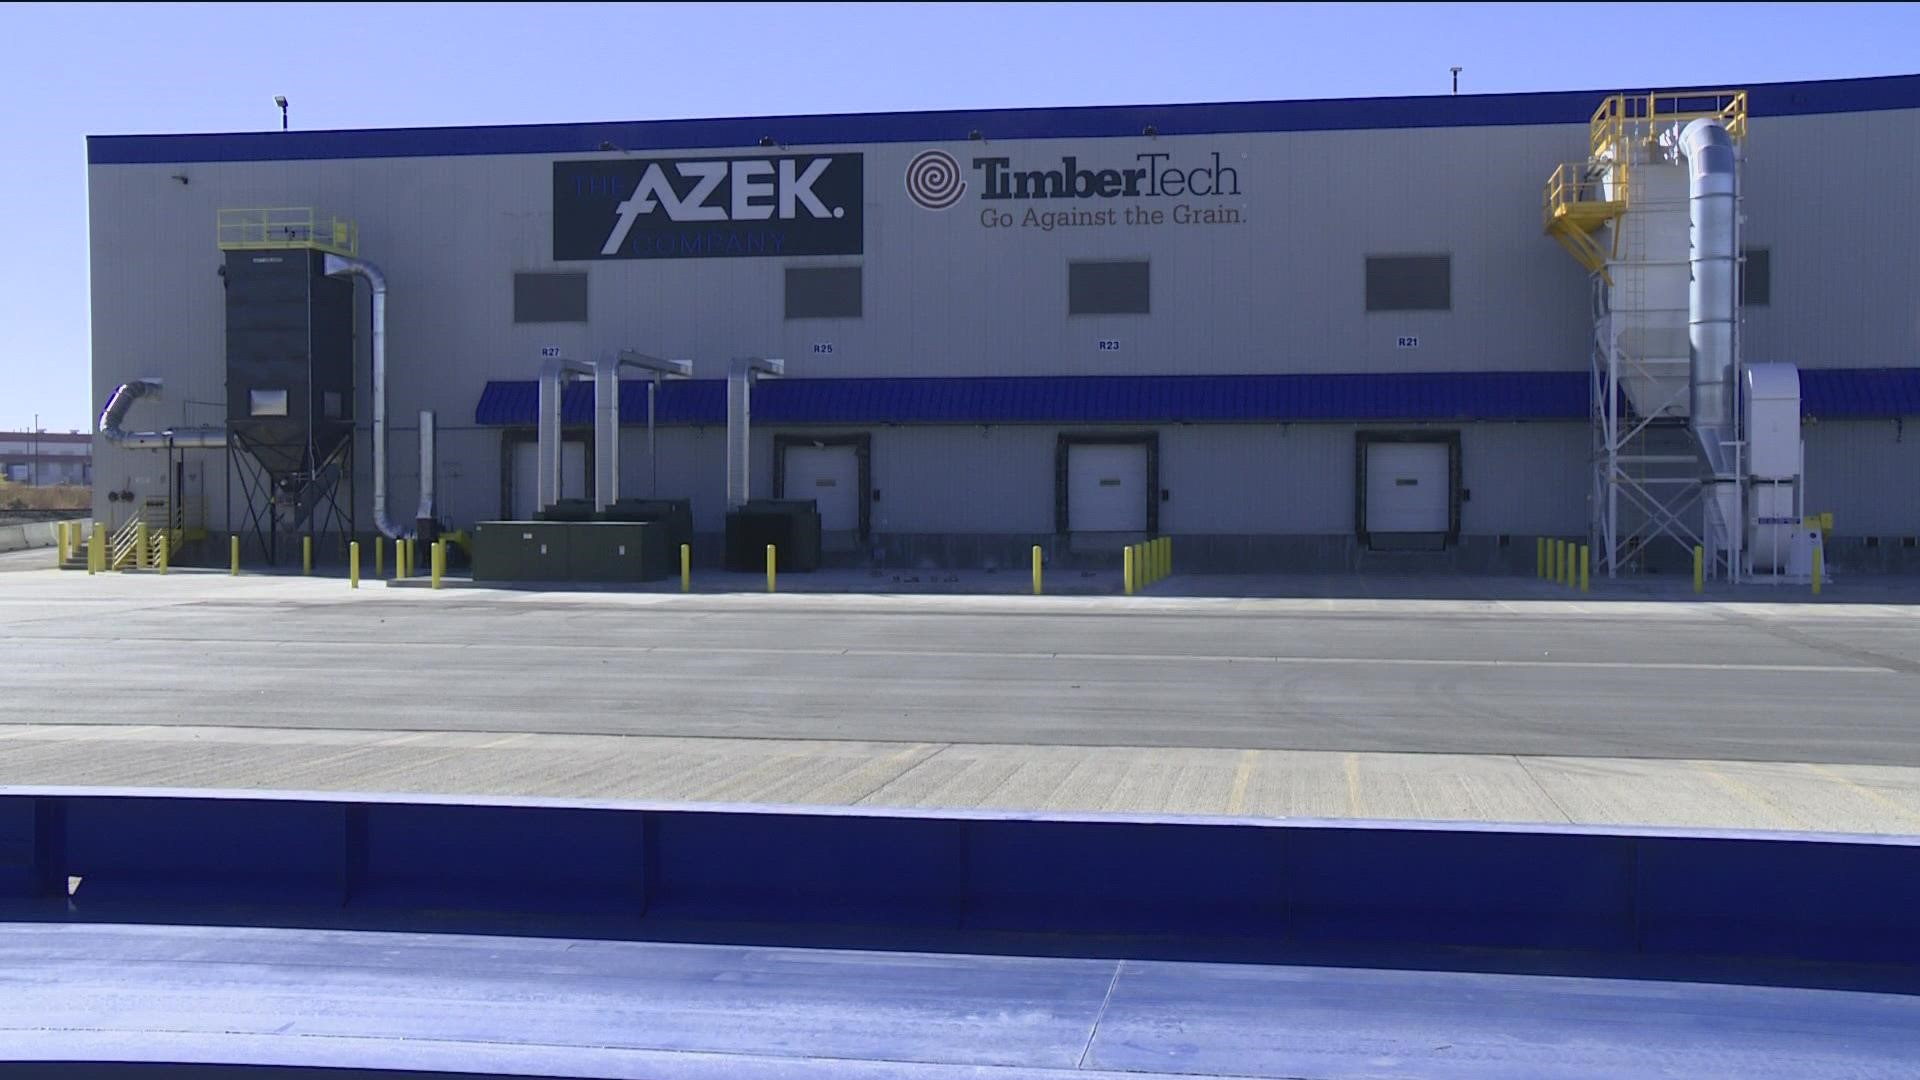 The AZEK company makes eco-friendly materials and is expected to bring 150 jobs to Boise, continuing to grow from there.